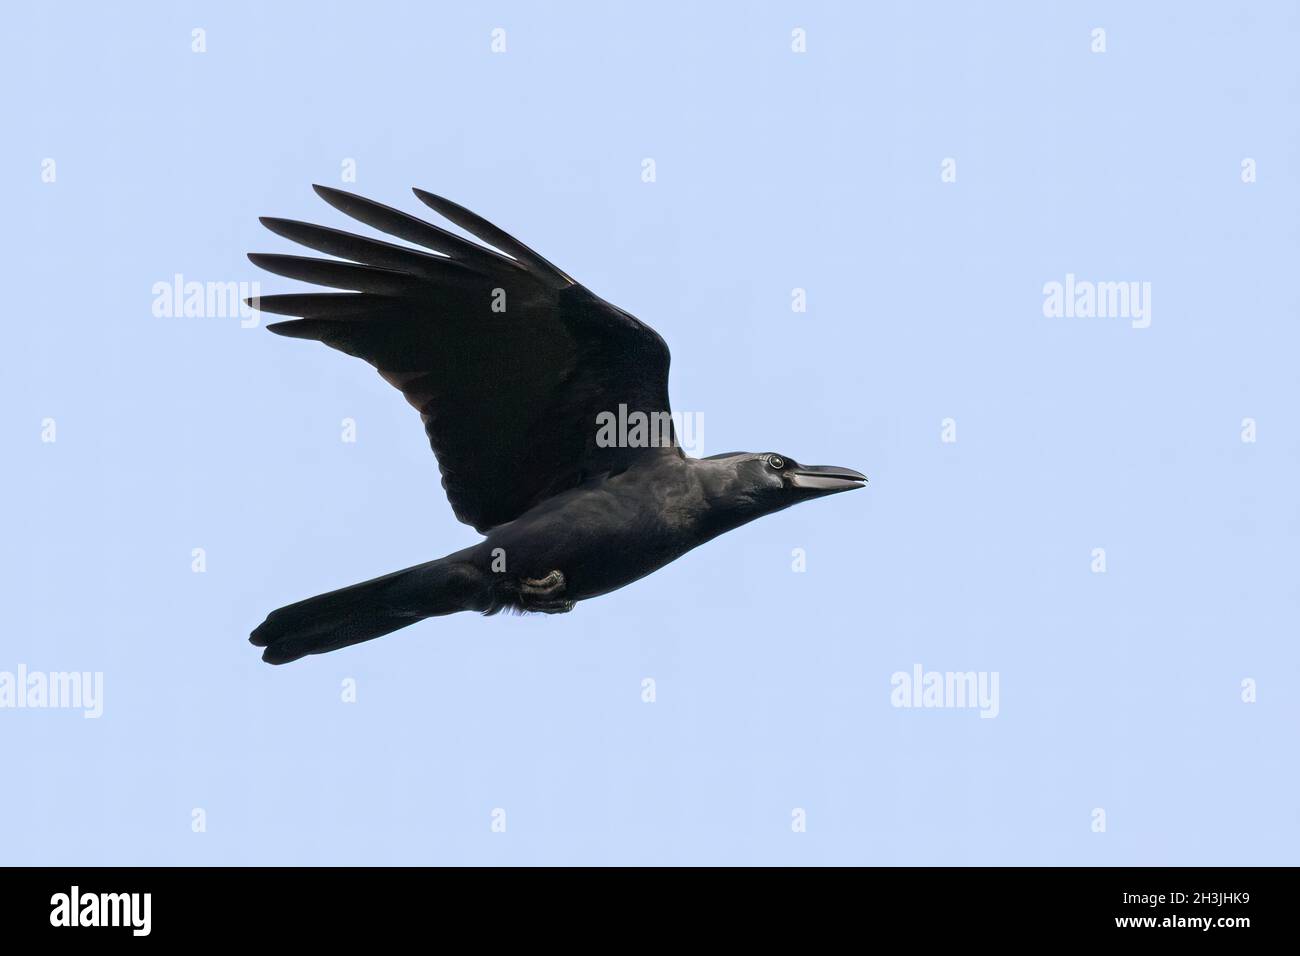 Image of a crow flapping its wings against a blue clear sky. Birds. Wild Animals. Stock Photo